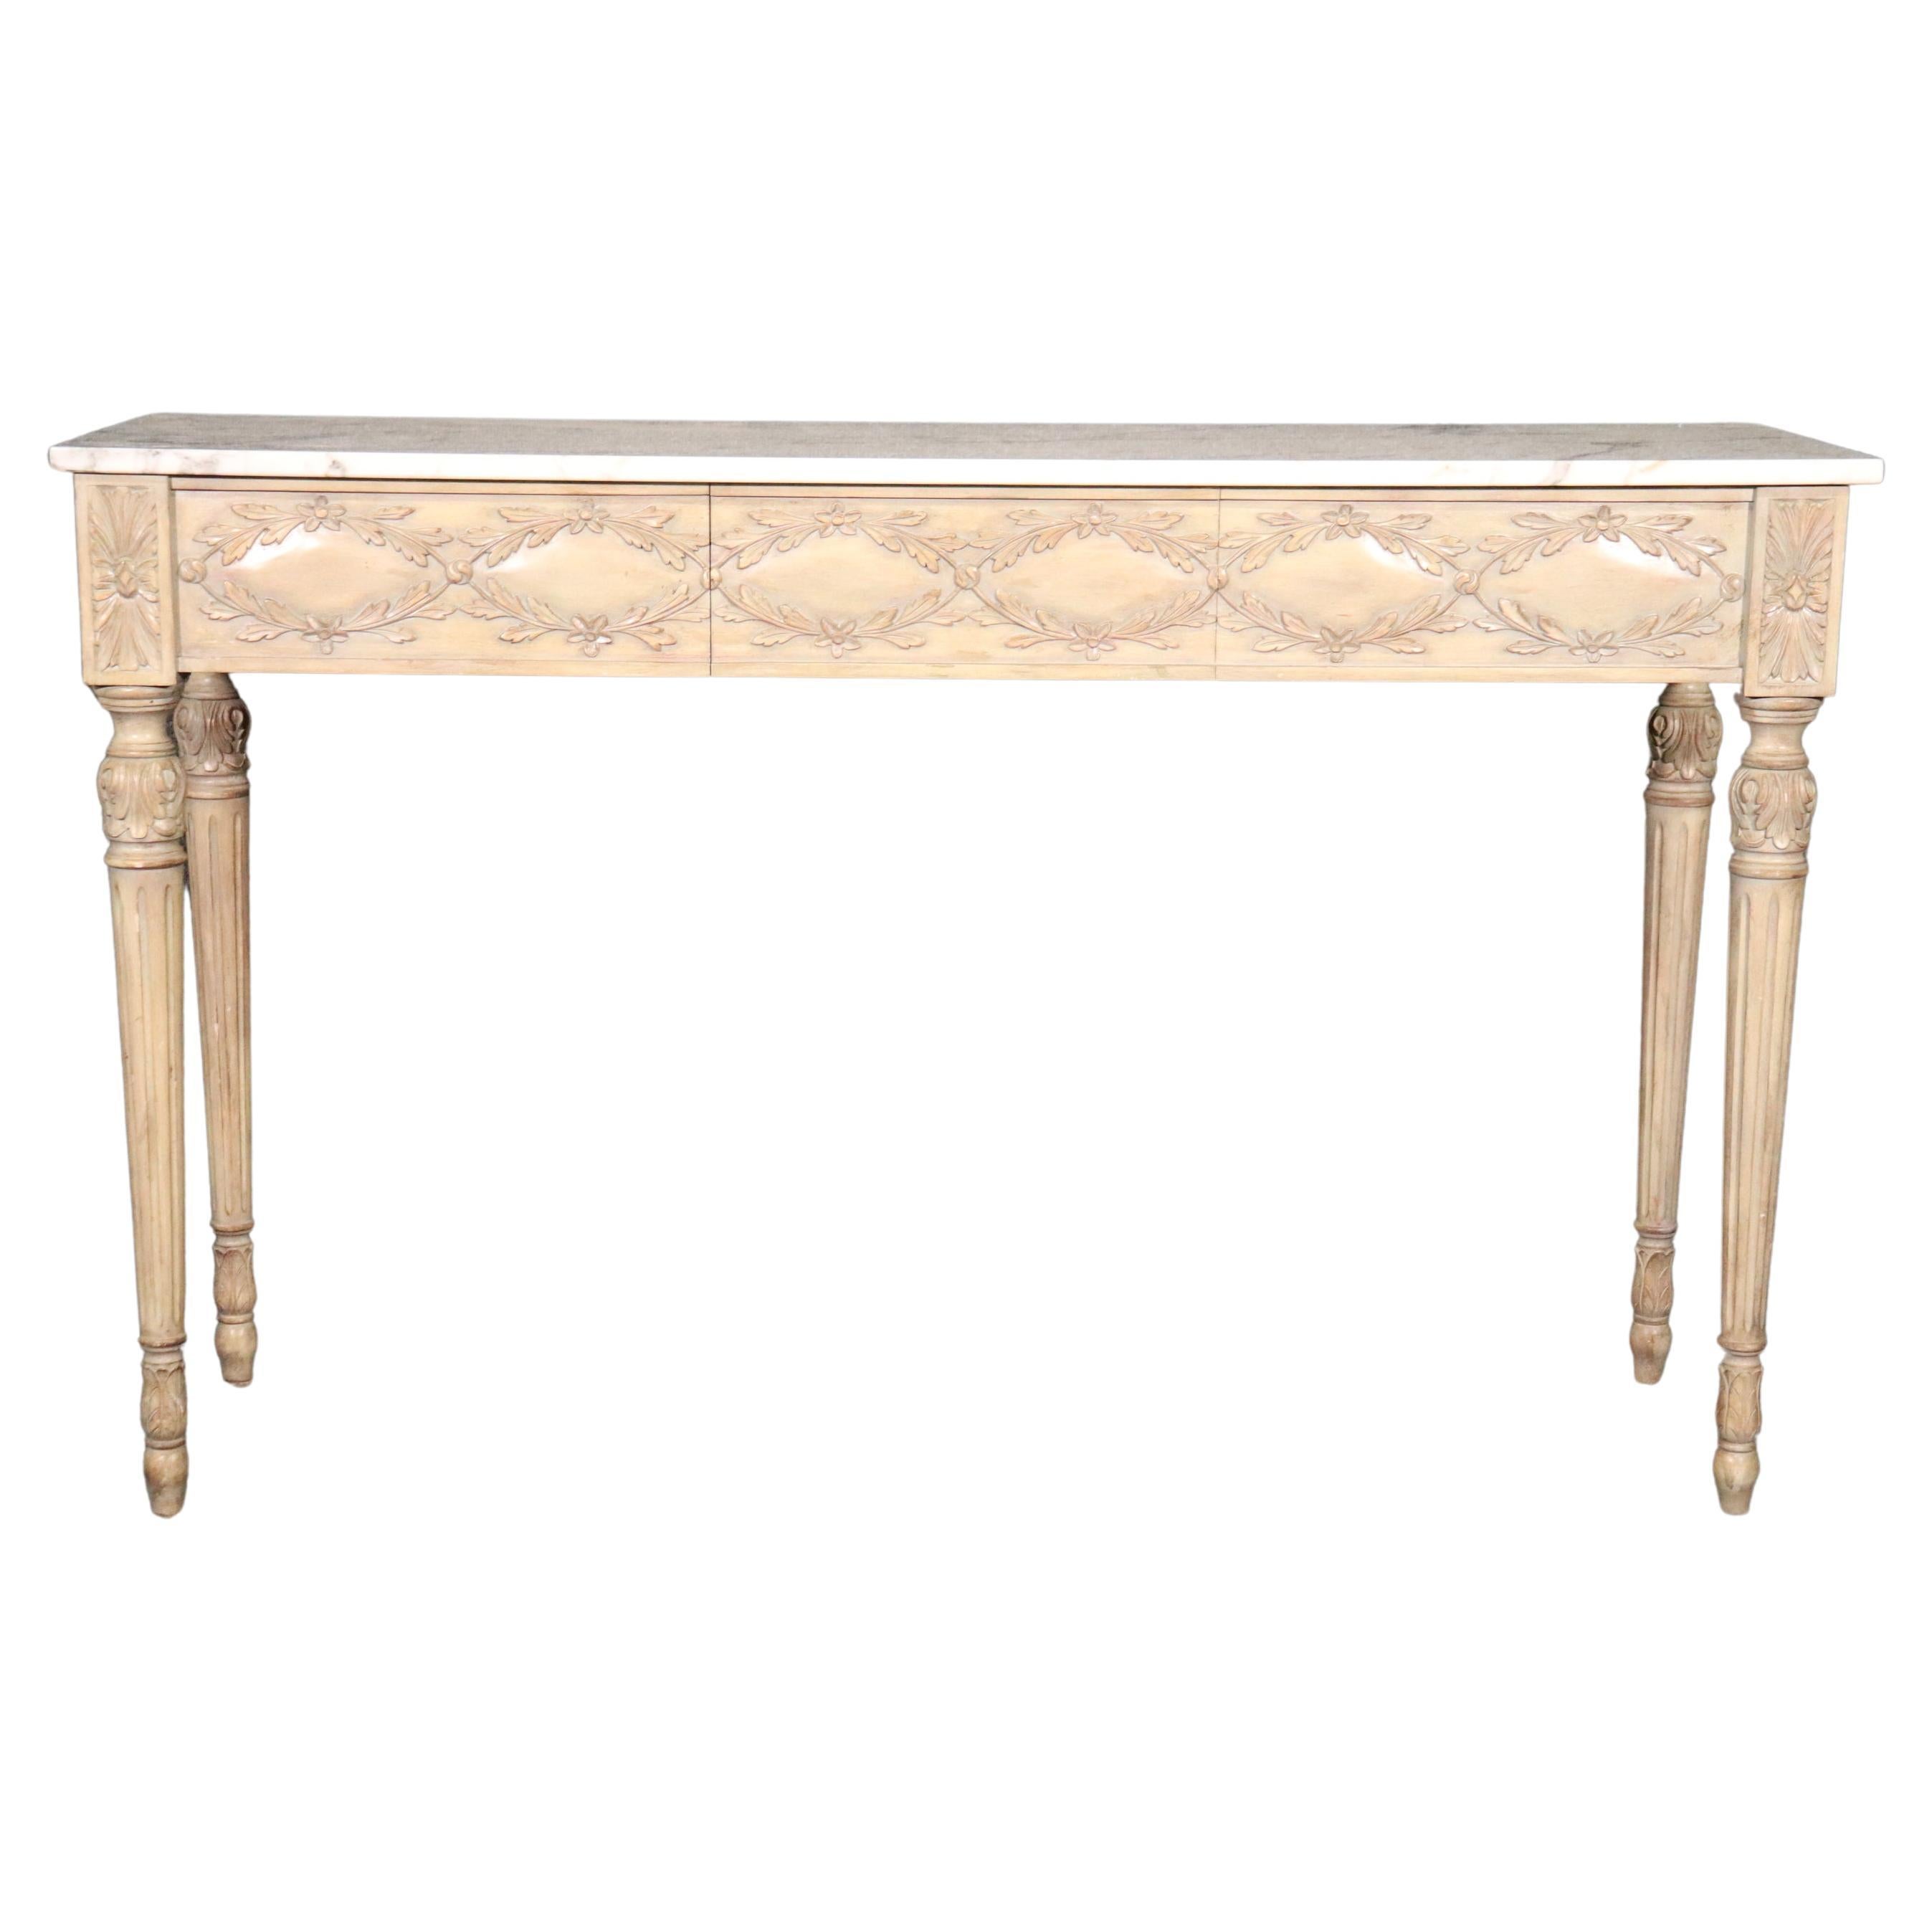 Fine French Louis XVI Marble Top Console Table with Glazed Finish circa 1920s